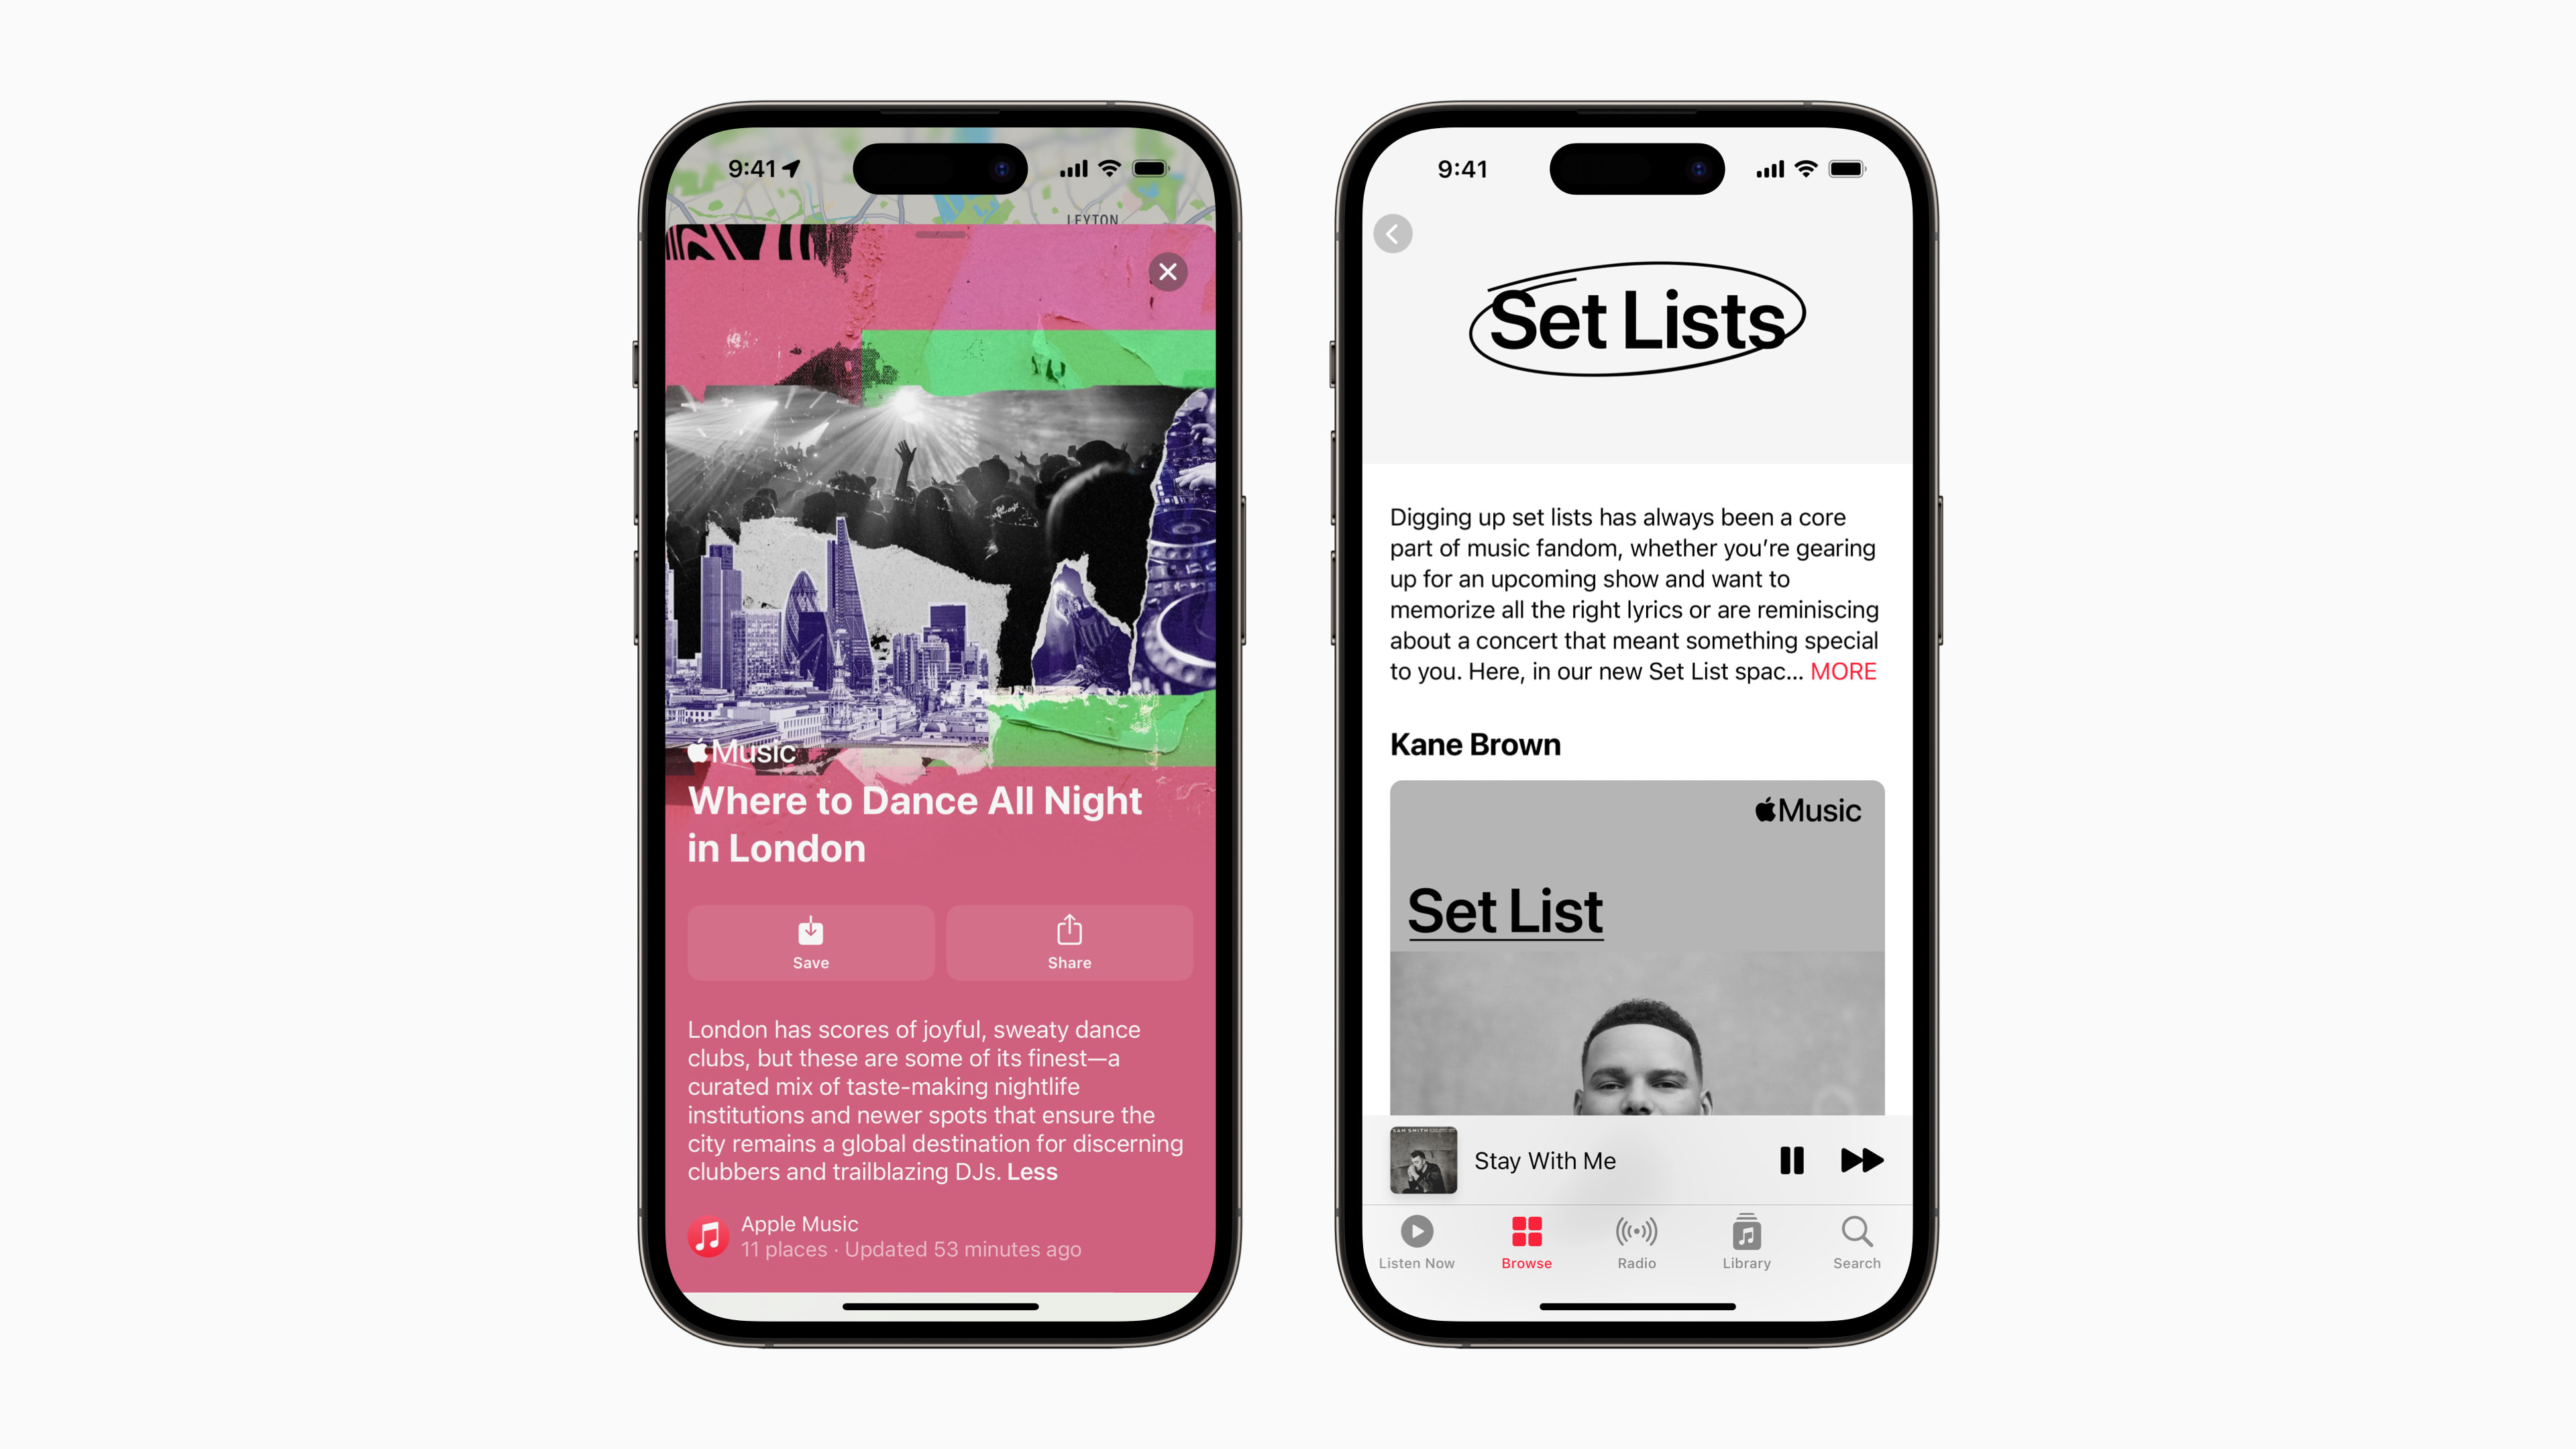 How to discover concerts in Apple Music and Apple Maps